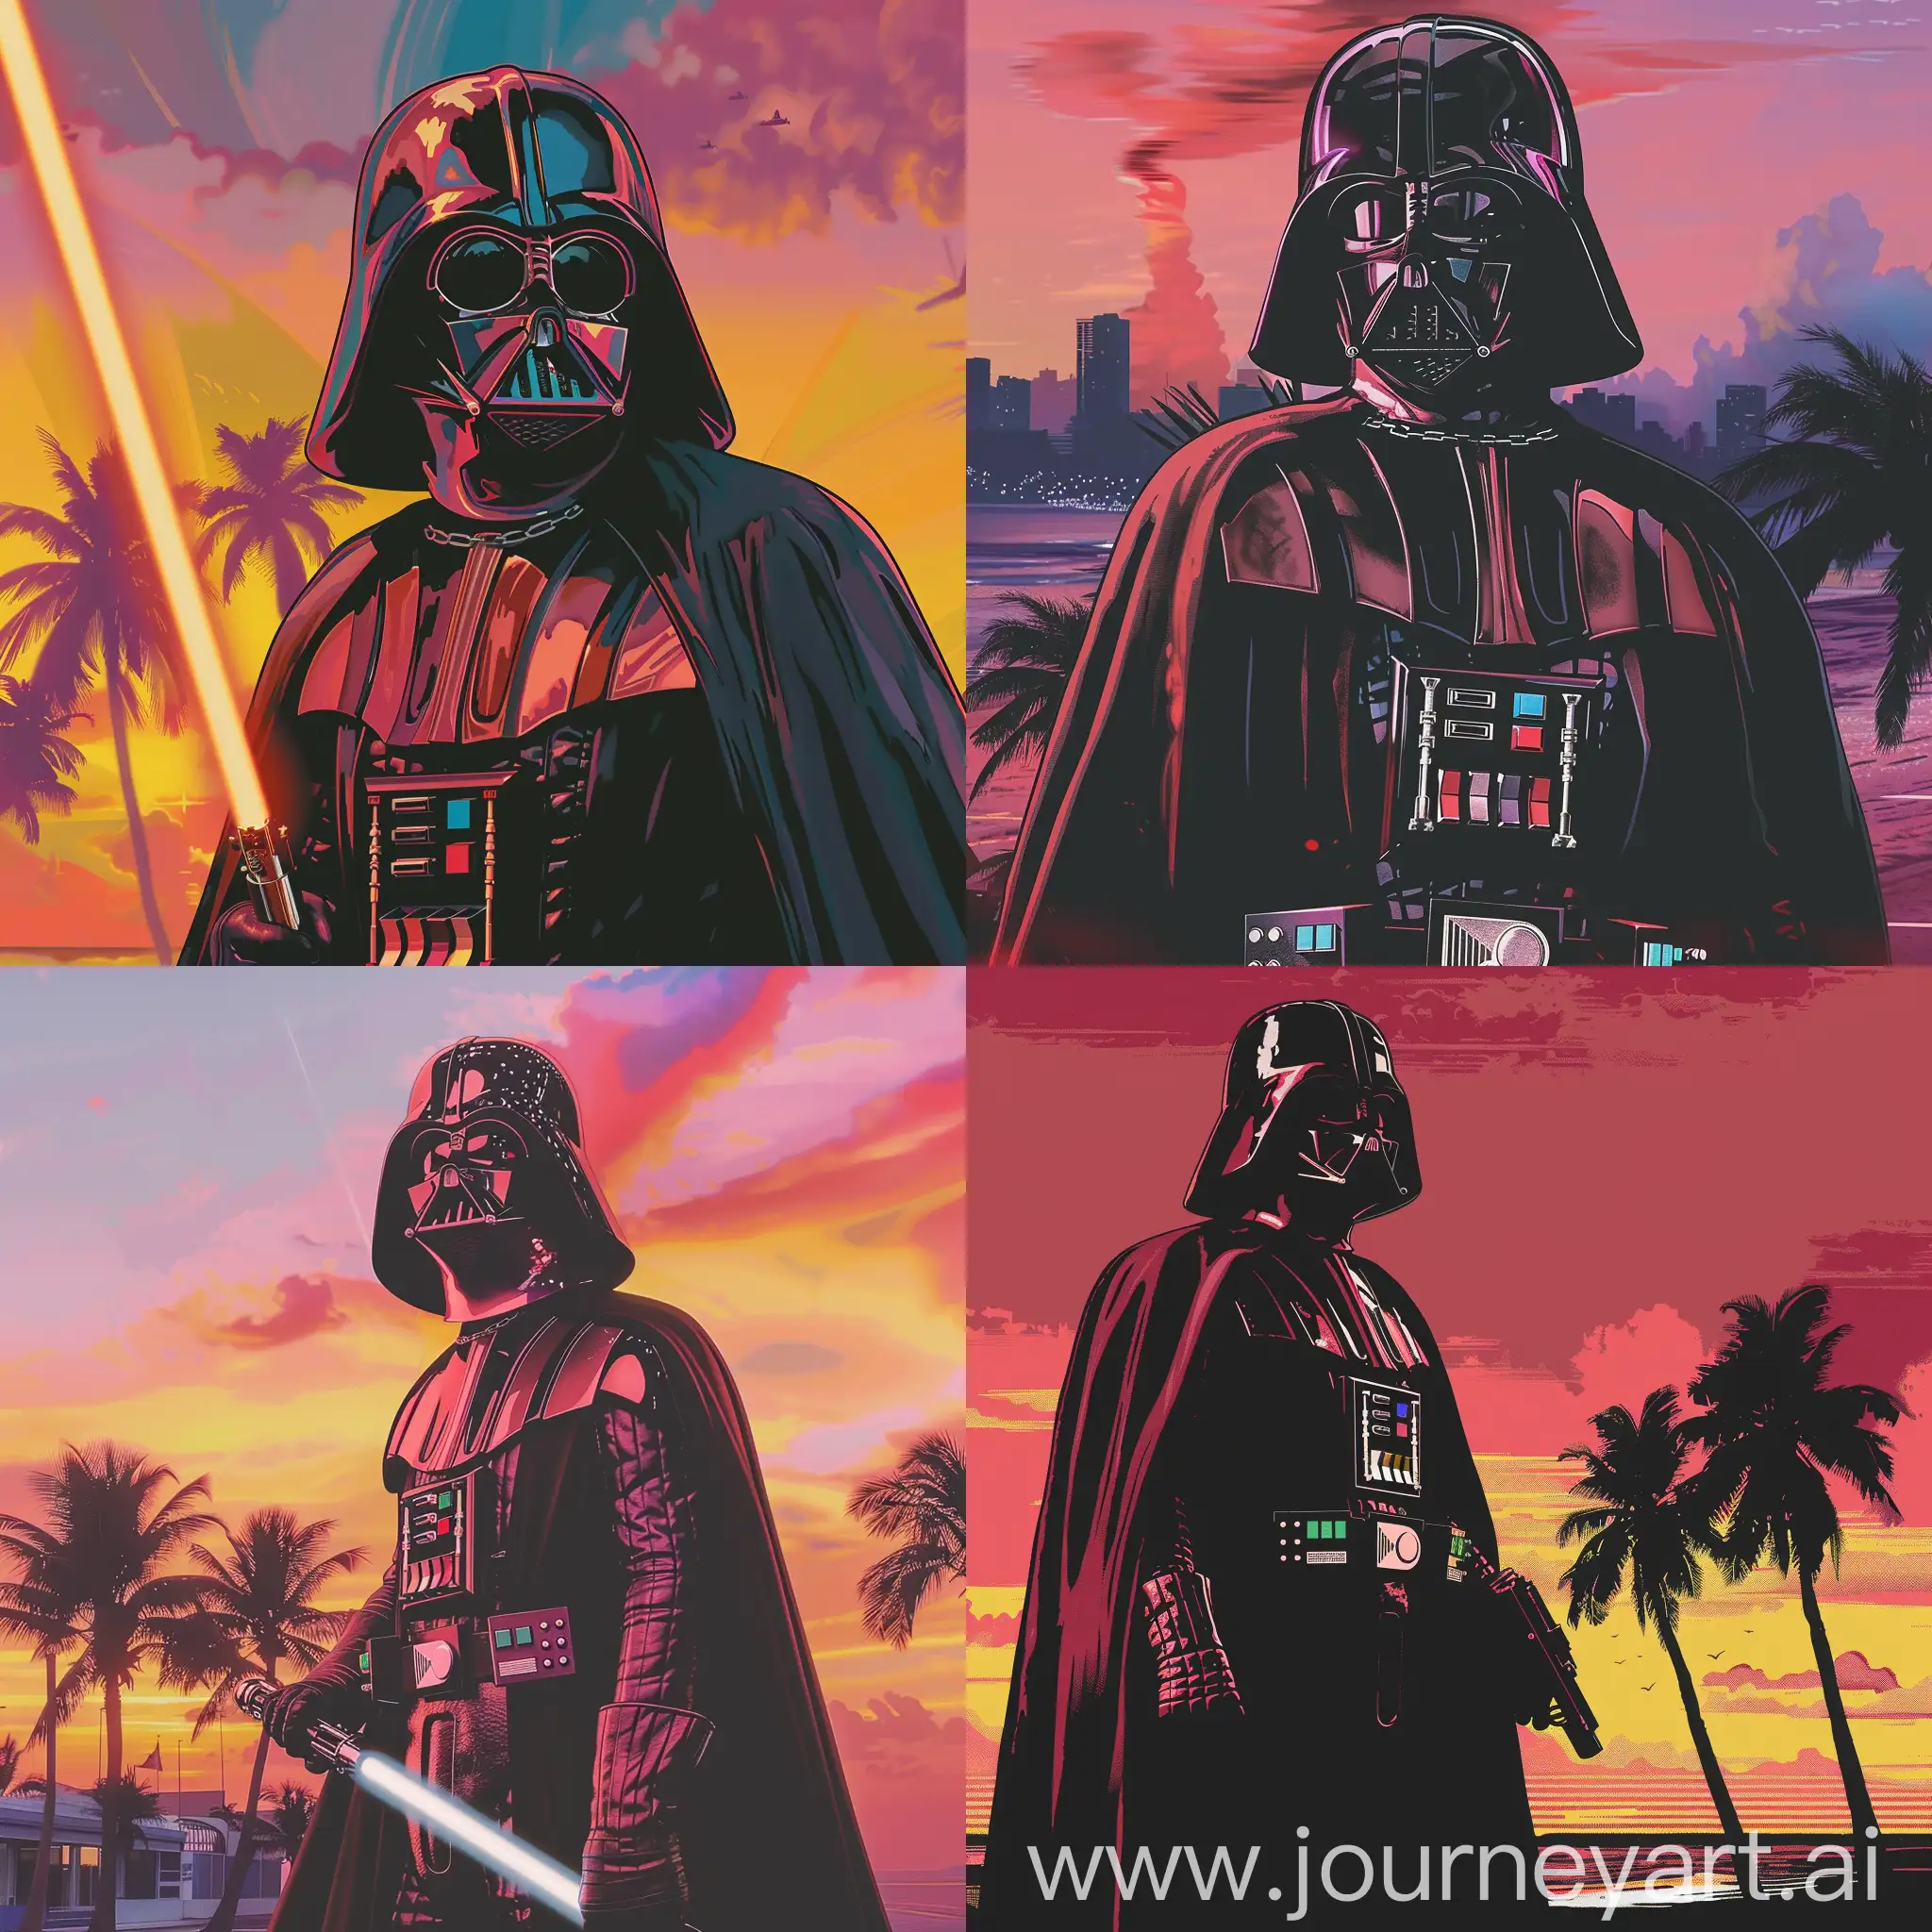 Darth-Vader-in-Vice-City-Dark-Lord-of-the-Sith-Amidst-Urban-Skyscrapers